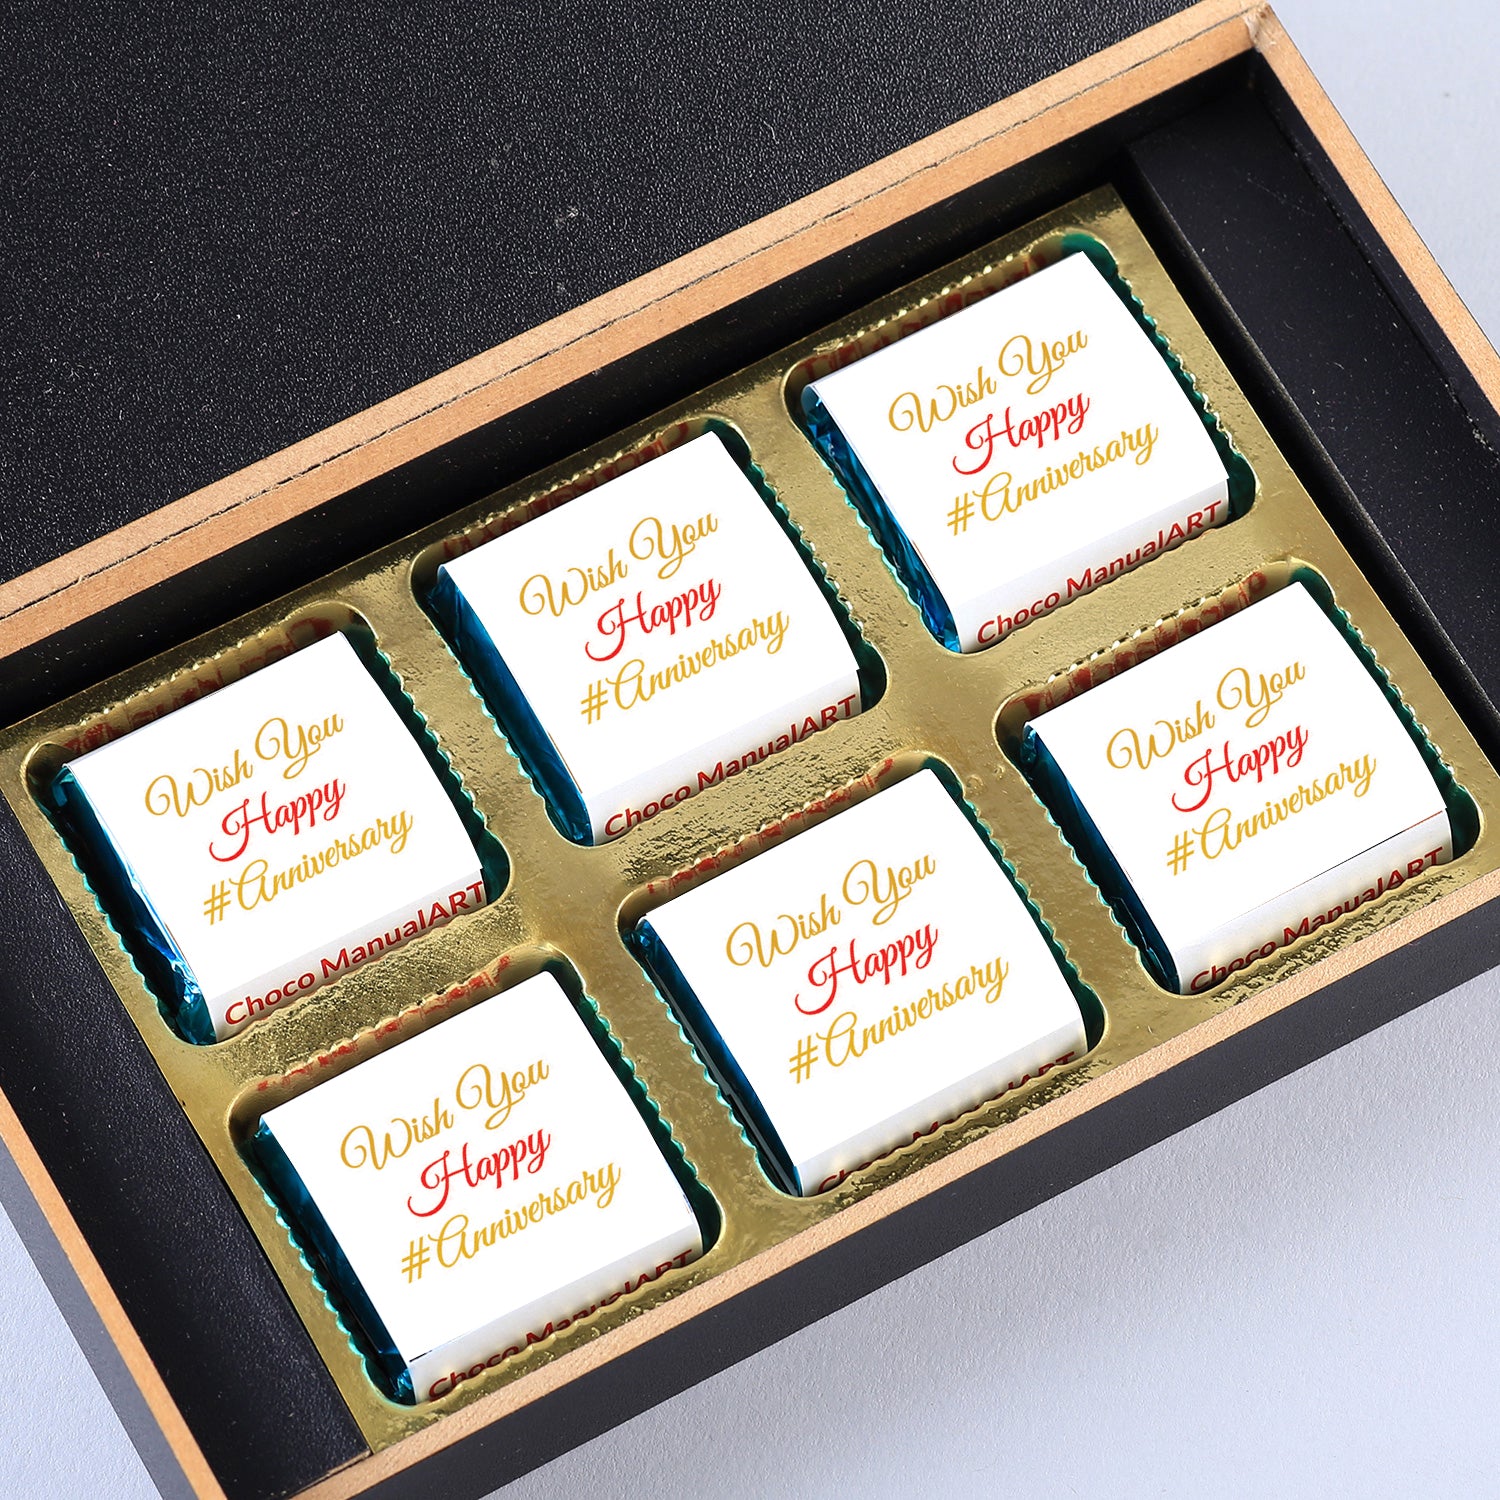 Names with Photo design Printed on Chocolate Wrappers